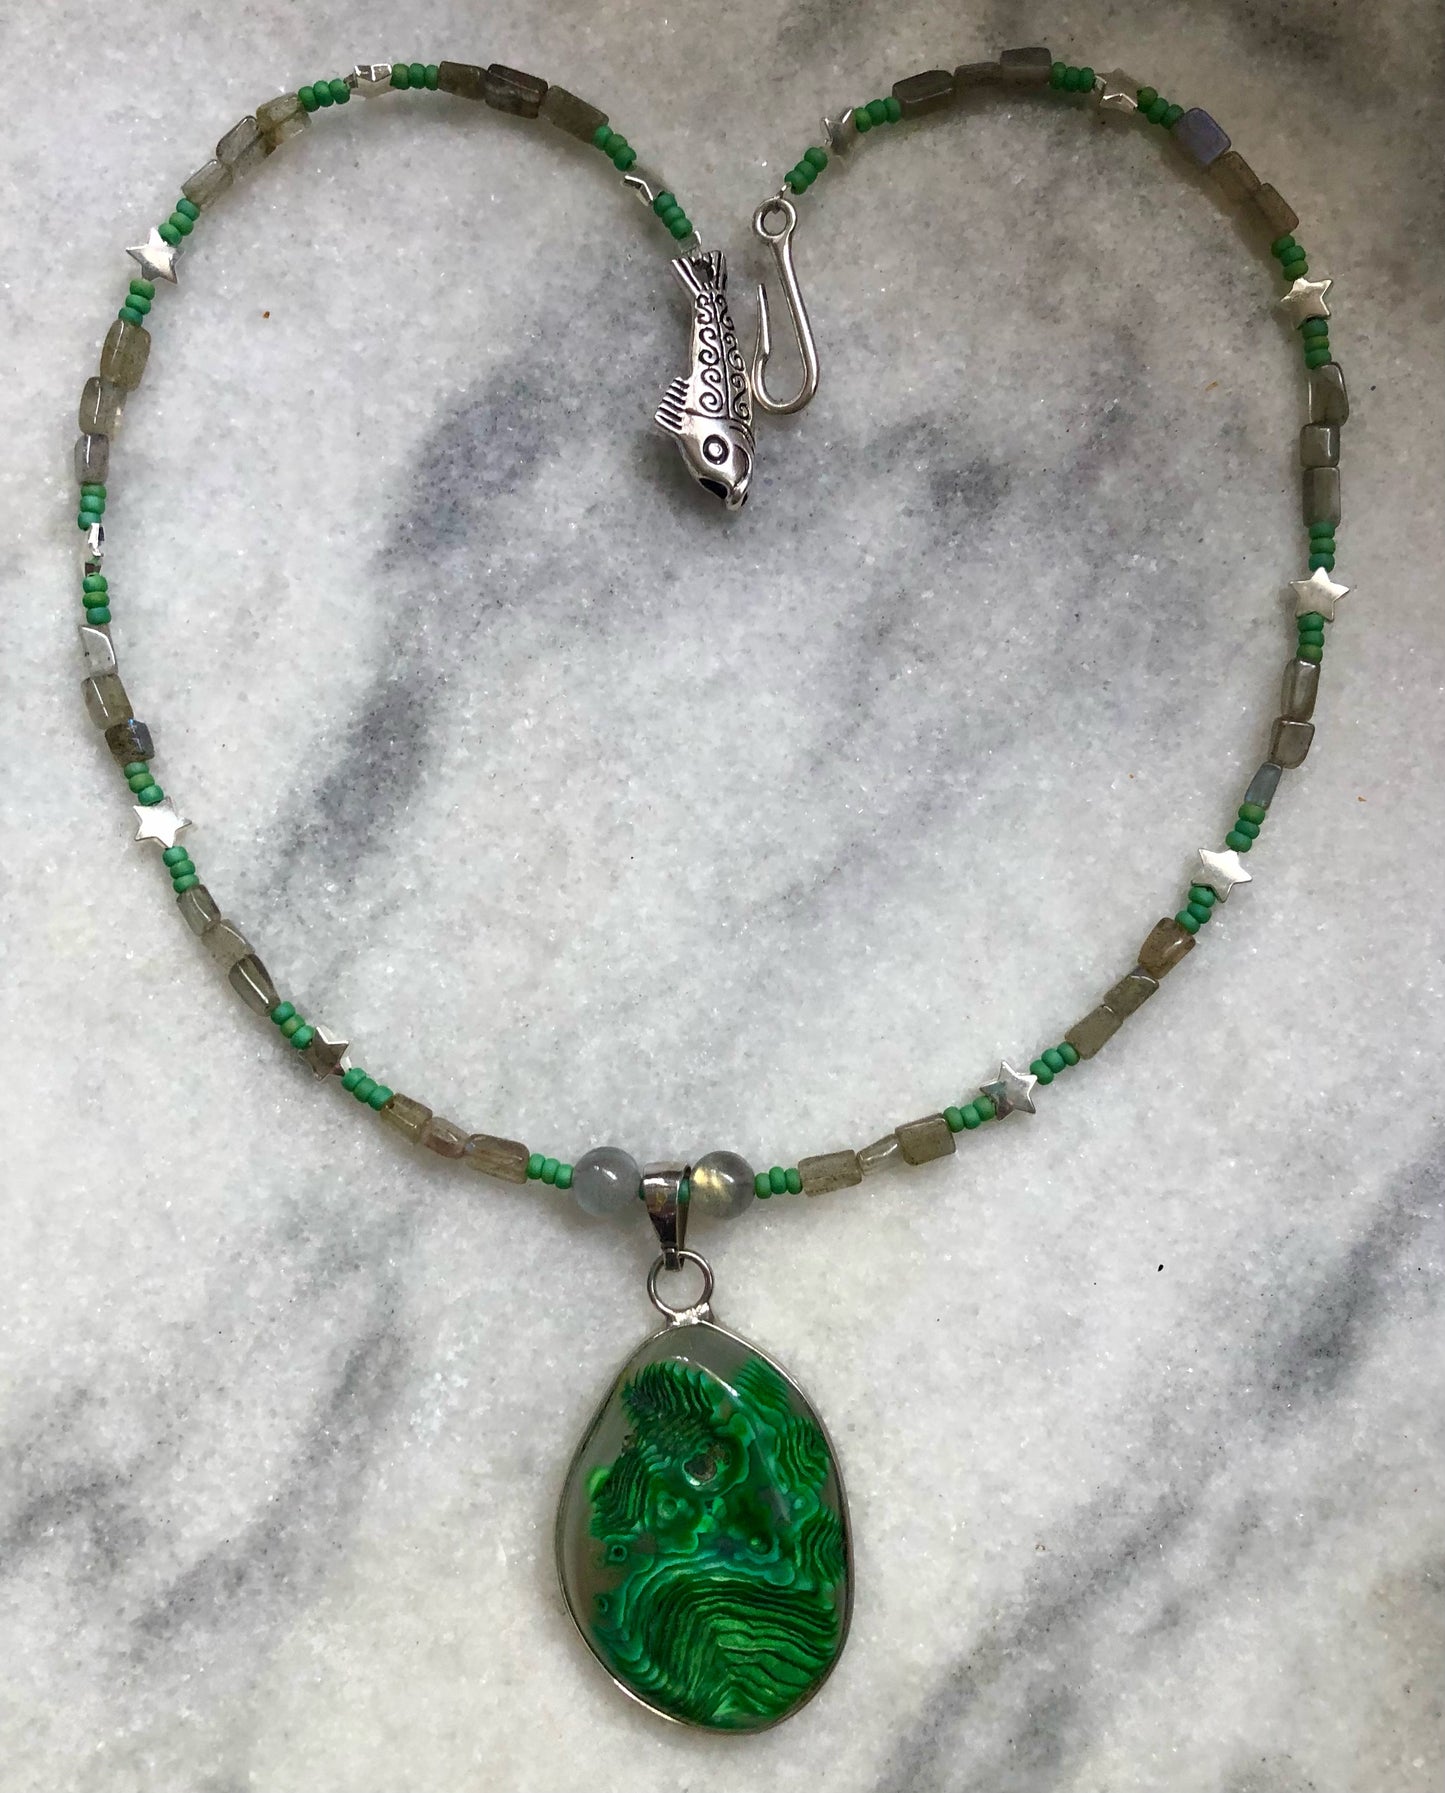 Green moss agate necklace with labradorite beads, green glass seed beads, and silver plated fish clasp.